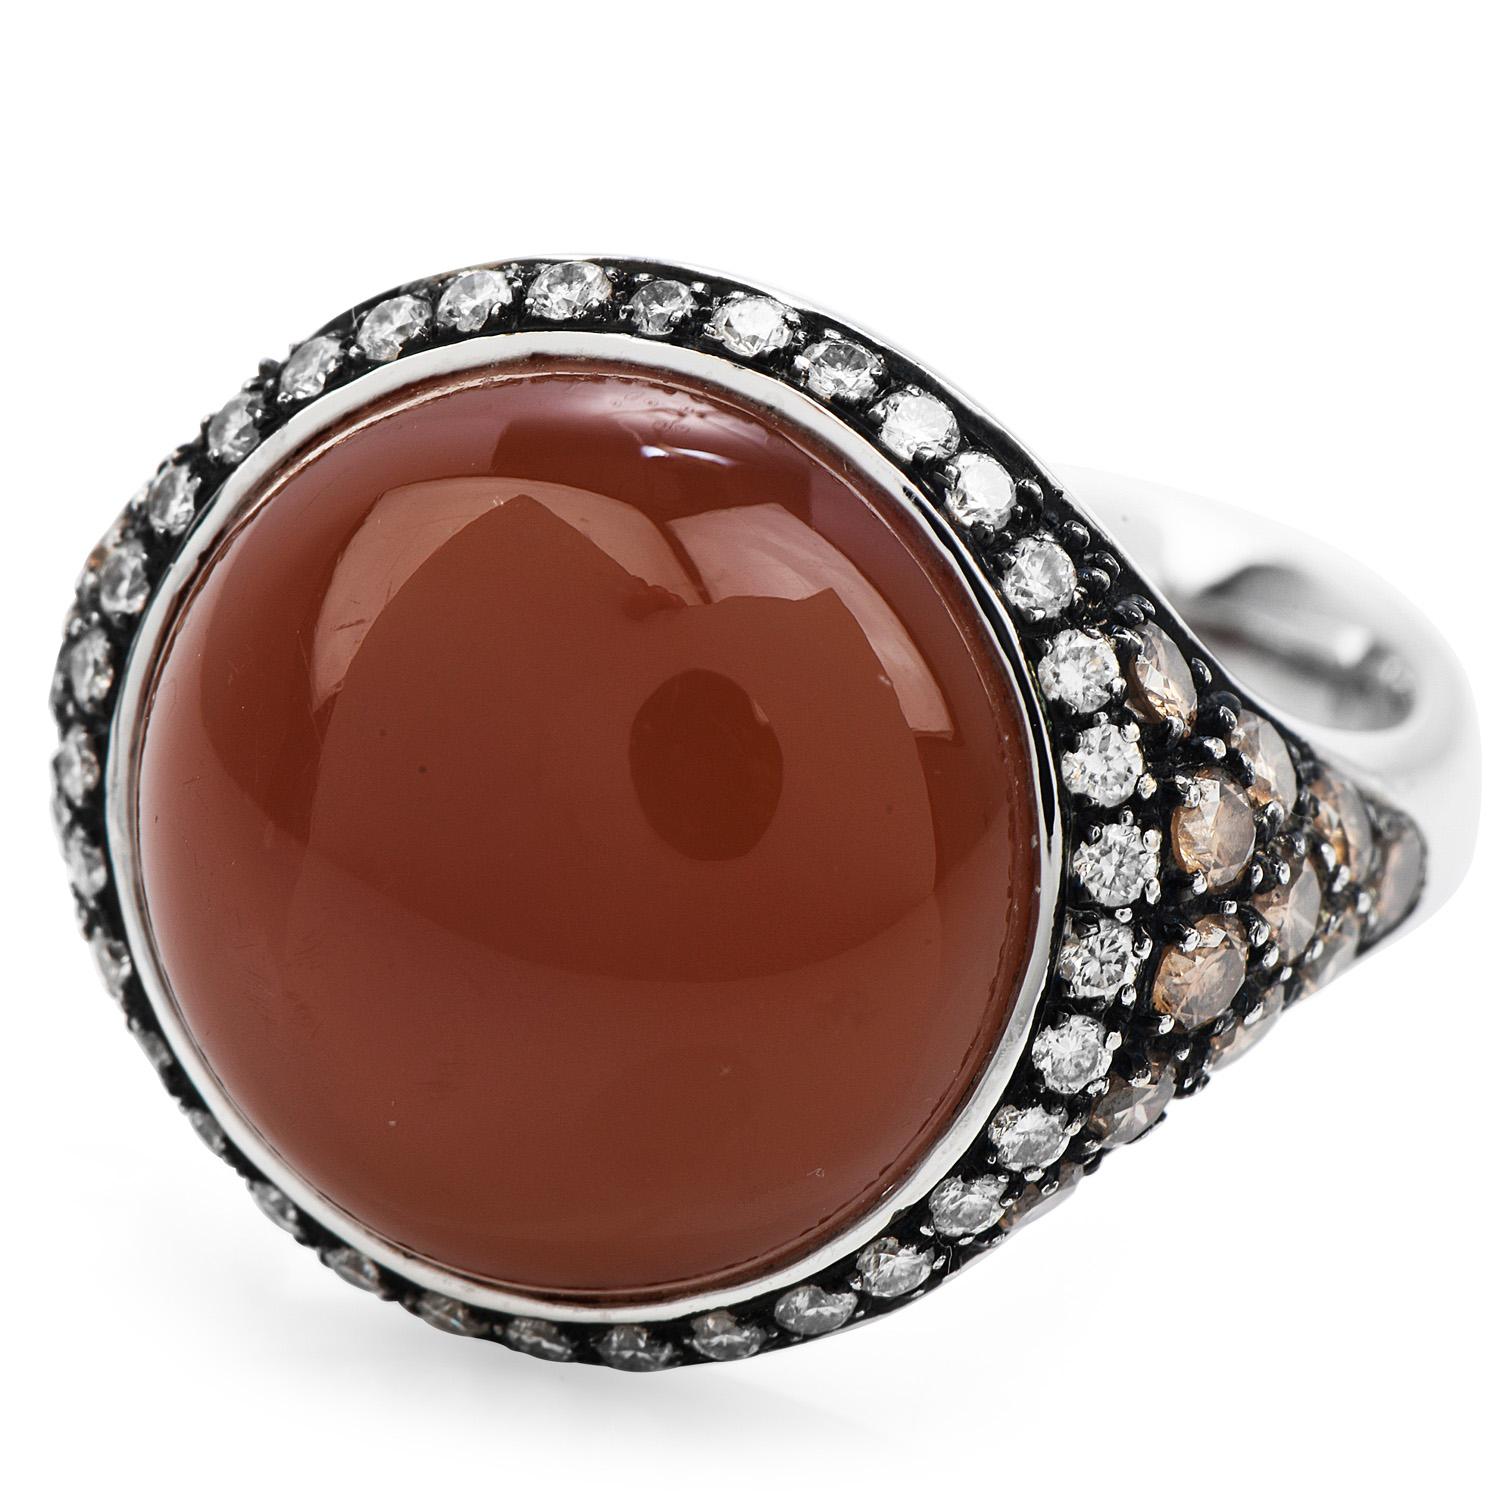 This is an exquisite Diamond, Fancy Brown, and Peach Moonstone Elegant Cocktail Ring with a total weight of 10.0 grams.

Crafted in solid heavy 18K white gold, the center is adorned by a unique Genuine Peach Moonstone measuring approx 14 mm x 14 mm